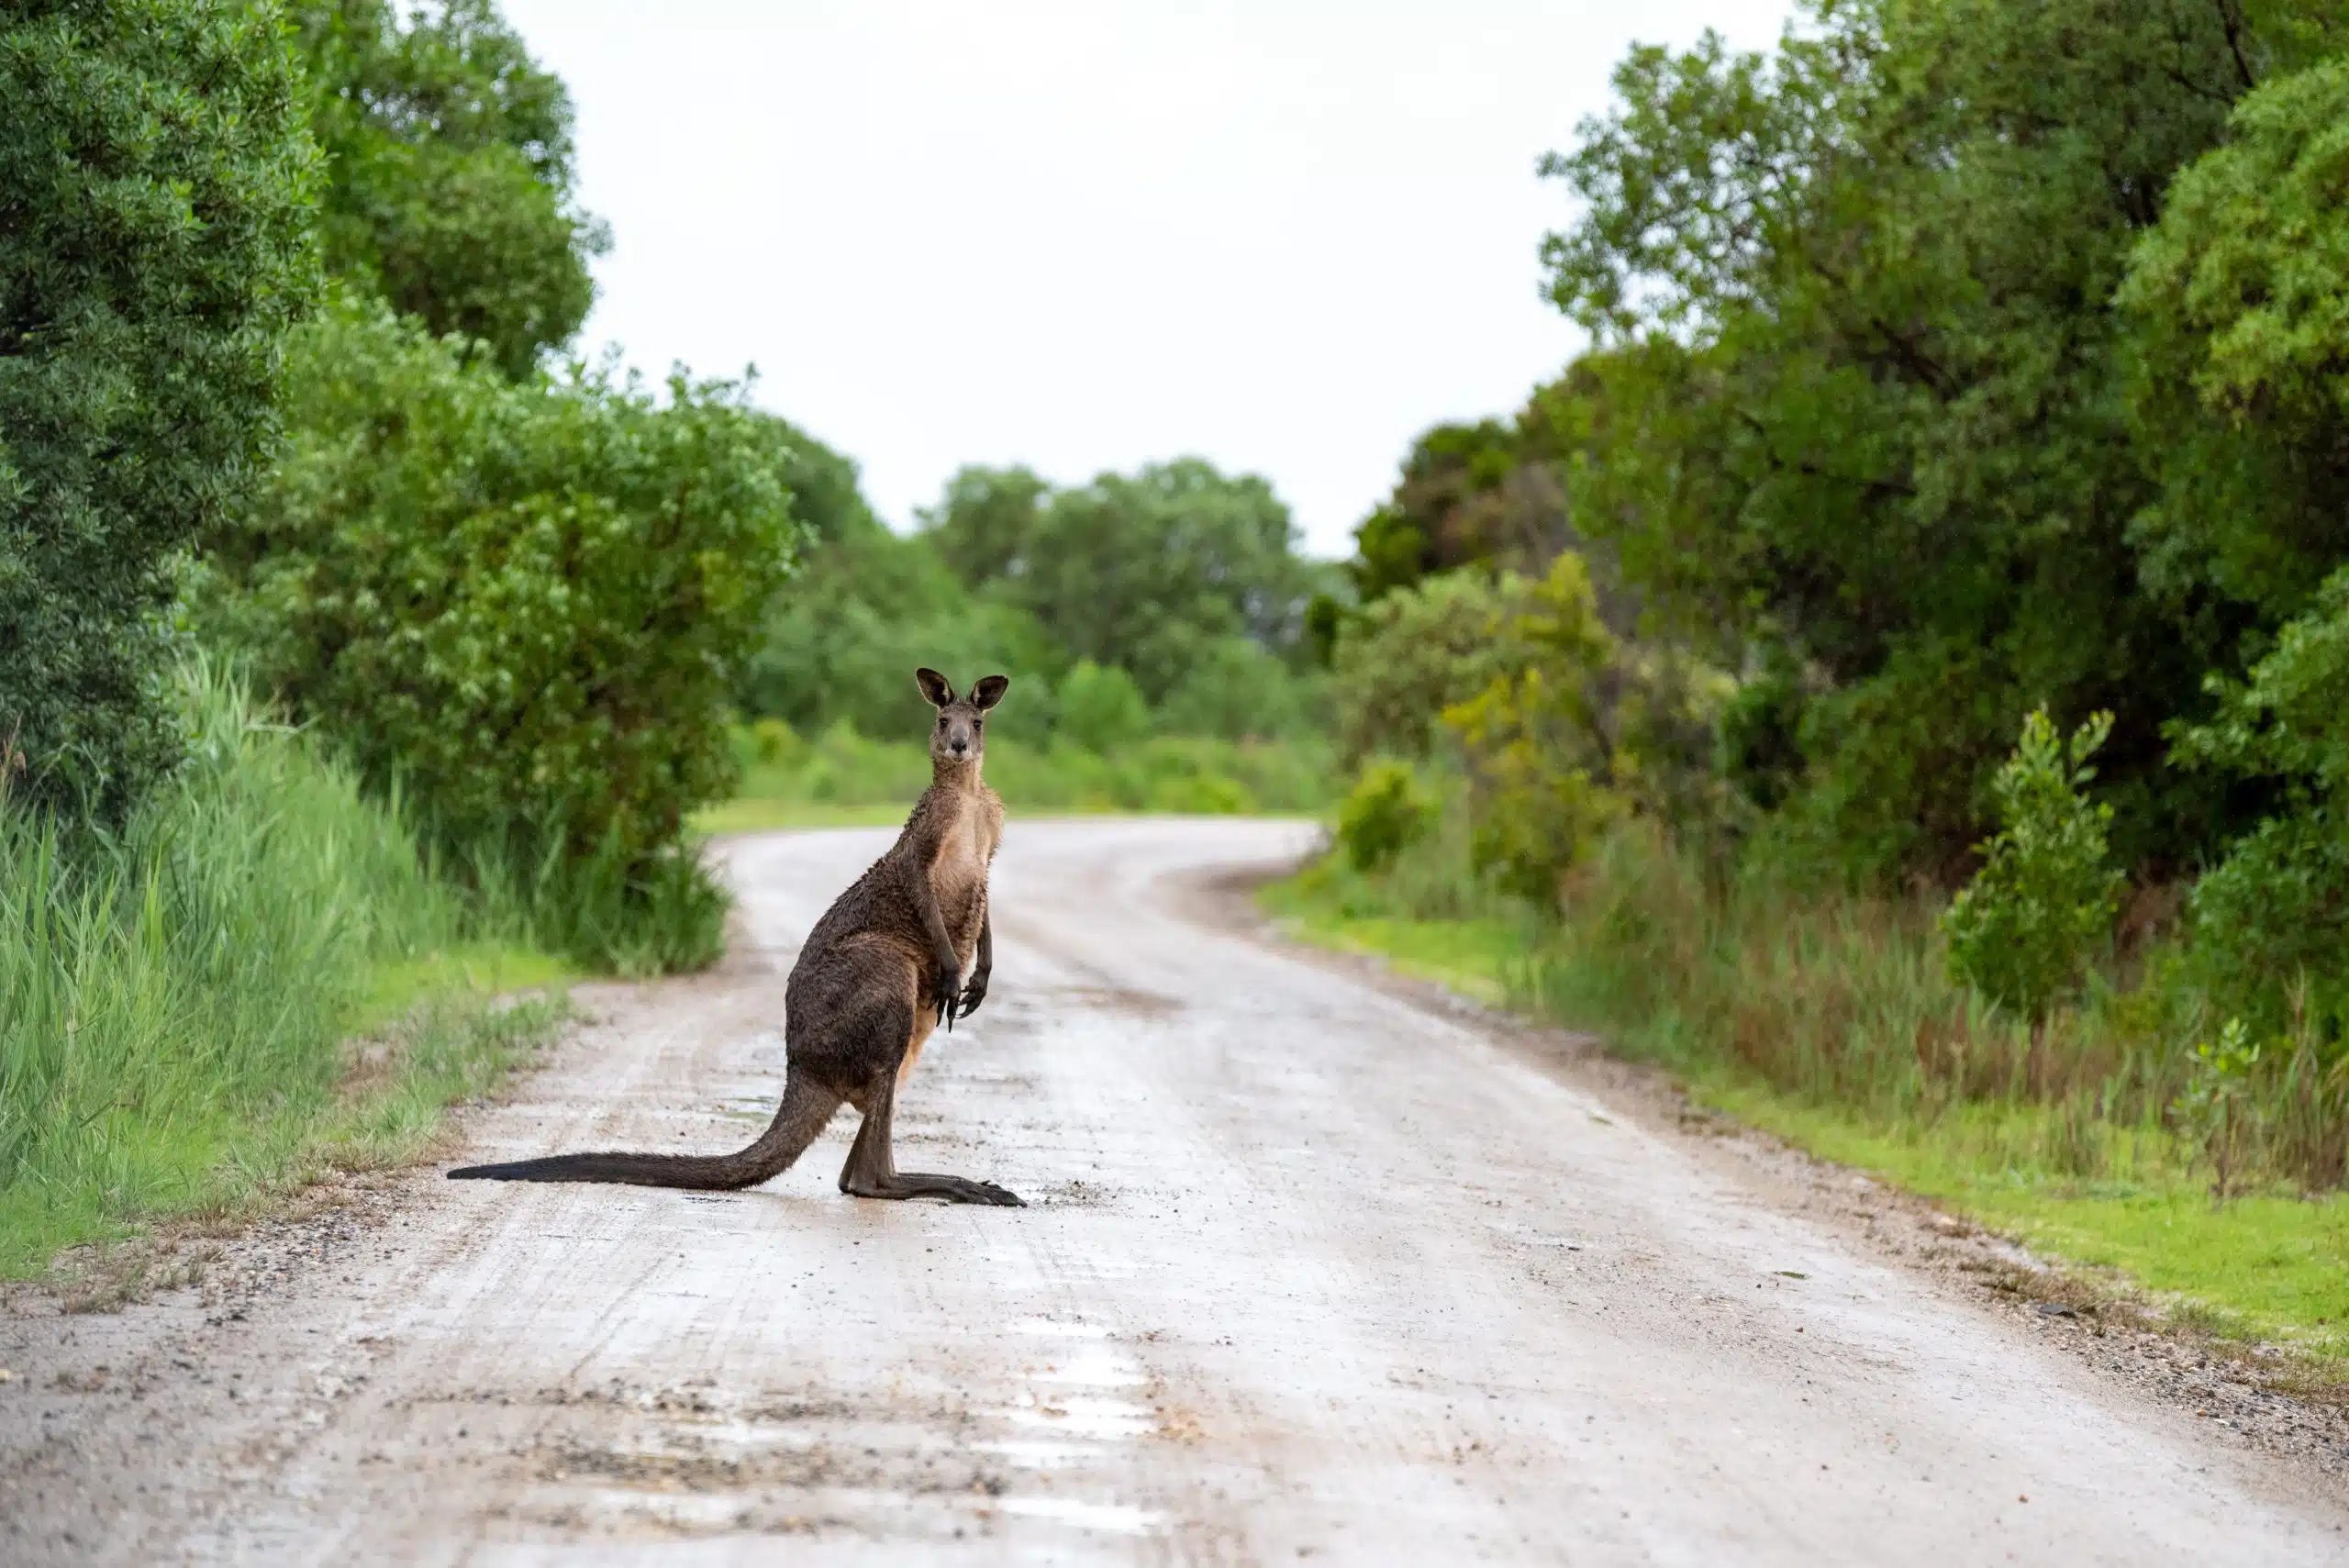 A kangaroo standing on a remote, dusty road in the Australian outback, symbolizing the unexpected encounters and natural beauty experienced while transporting a car across Australian states. The image reflects the adventurous spirit of self-driving on long interstate routes, highlighting the unique wildlife and landscapes of Australia, relevant to the article 'Interstate Car Transport: Should You Drive Yourself Or Hire A Professional?